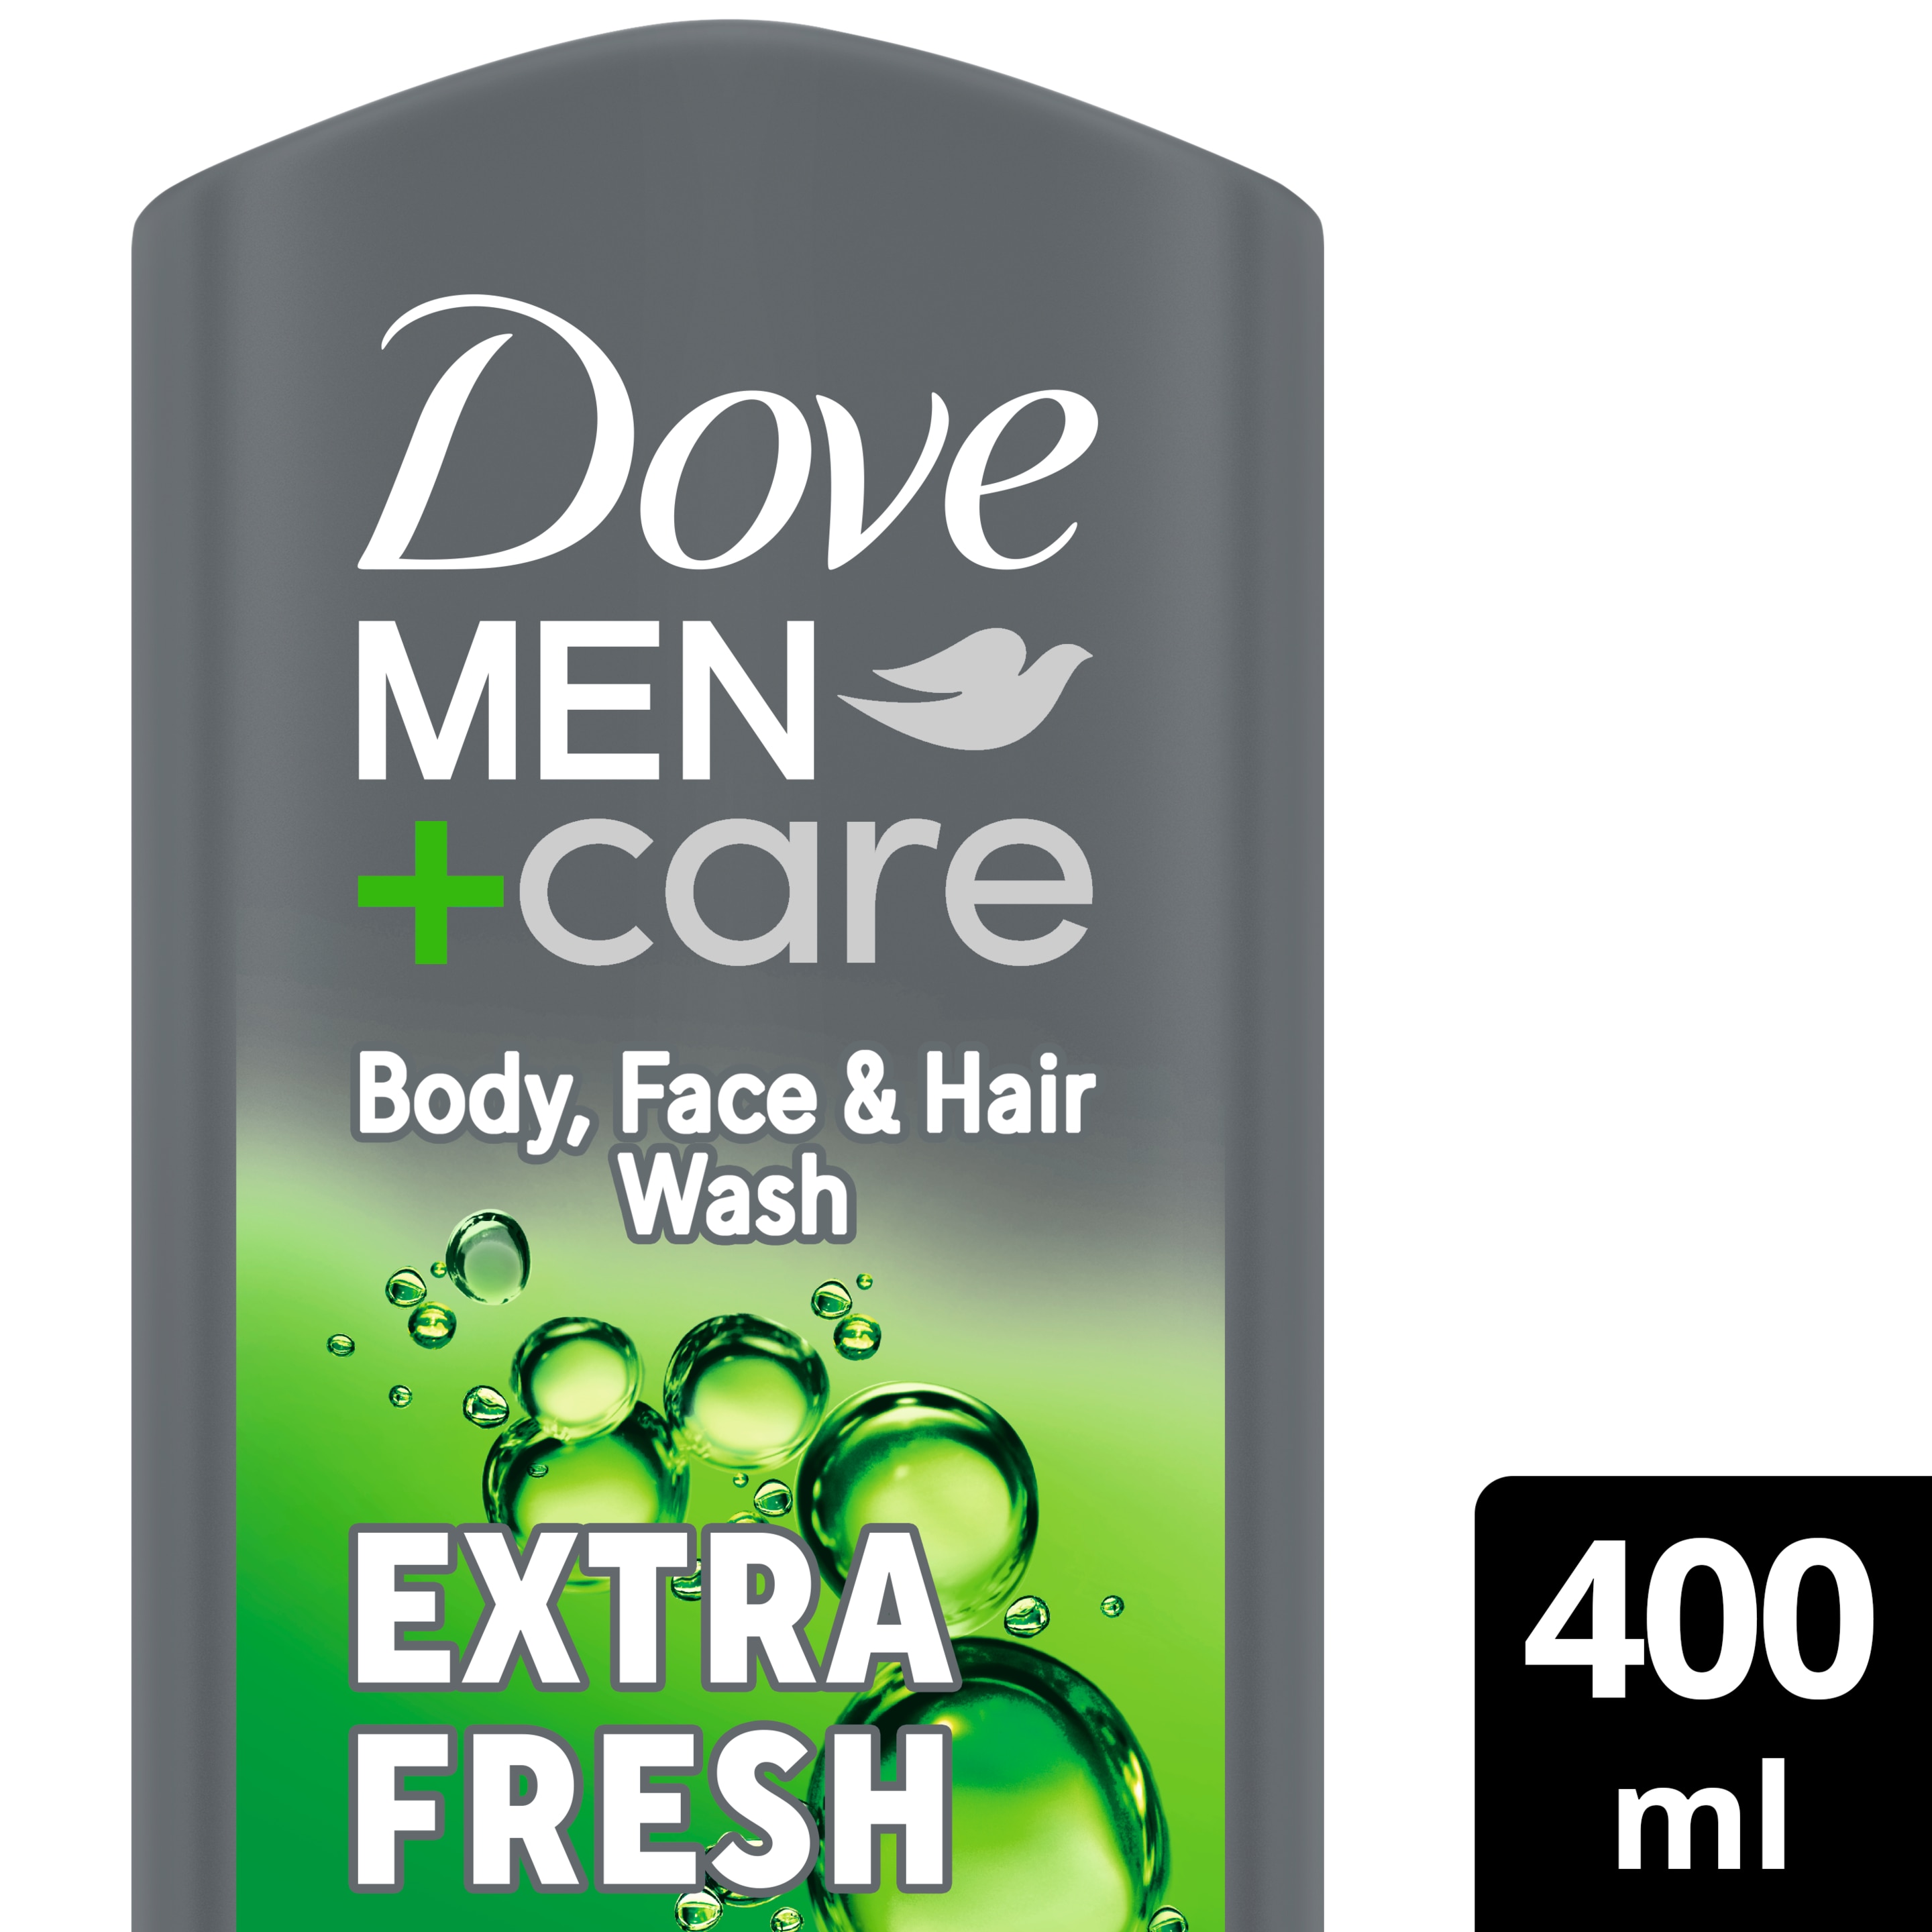 Dove Men+Care Refreshing Extra Fresh 3-in-1 Body, Face + Hair Wash